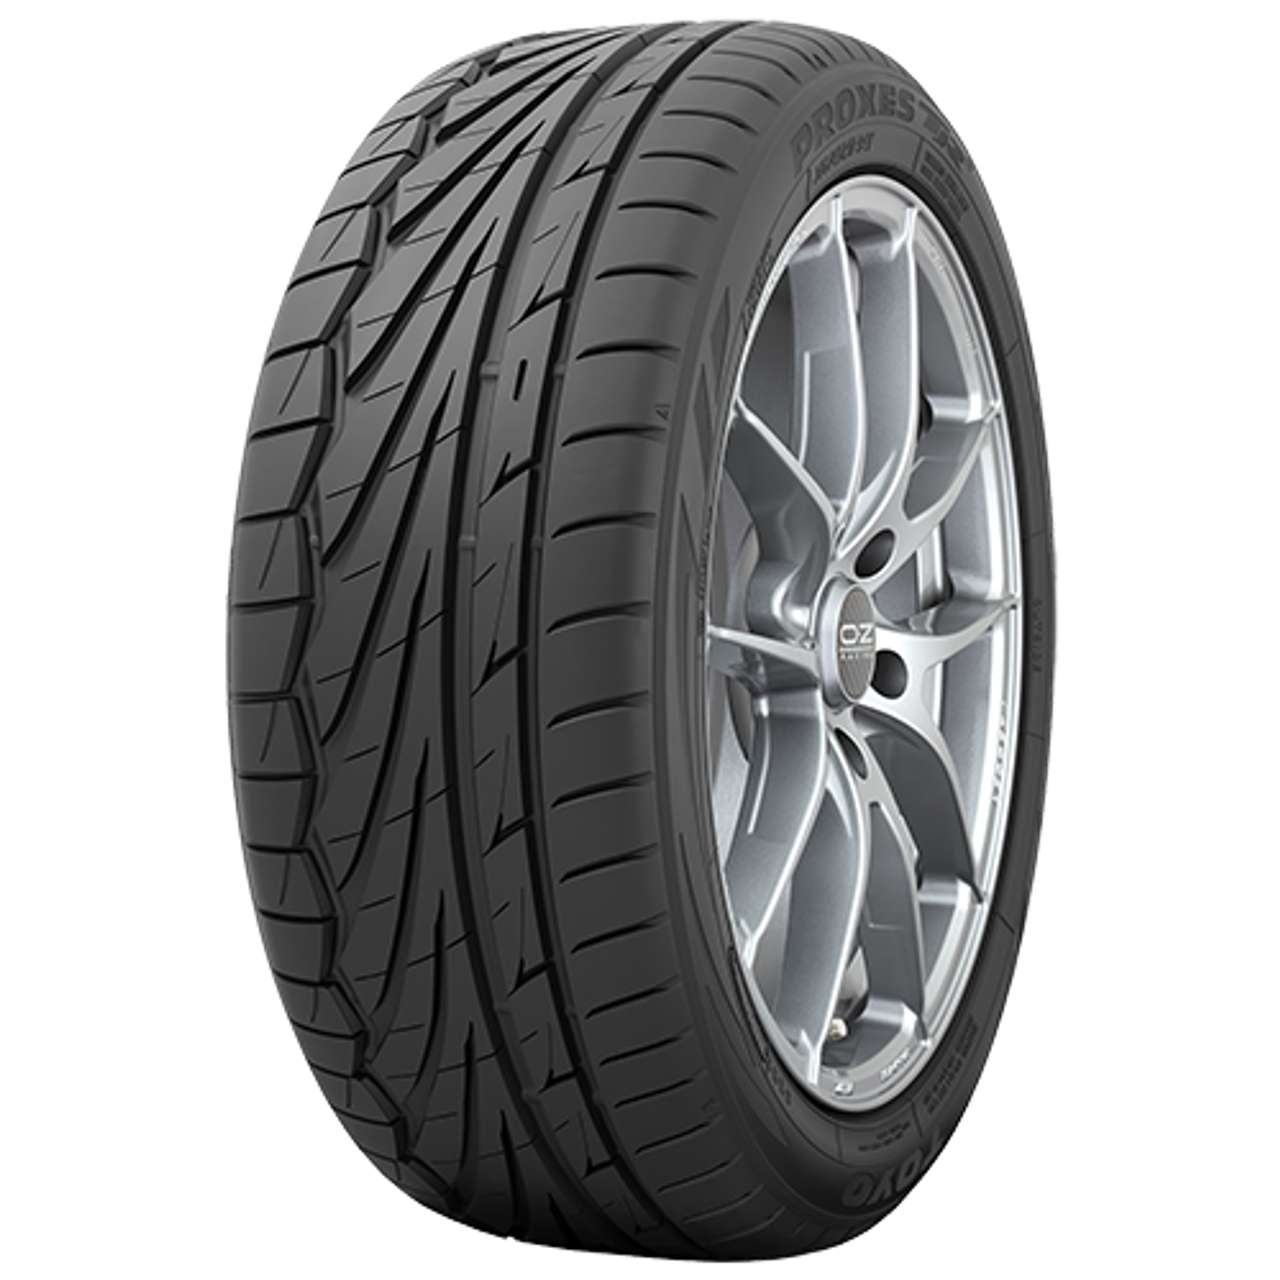 TOYO PROXES TR1 185/55R16 83V BSW